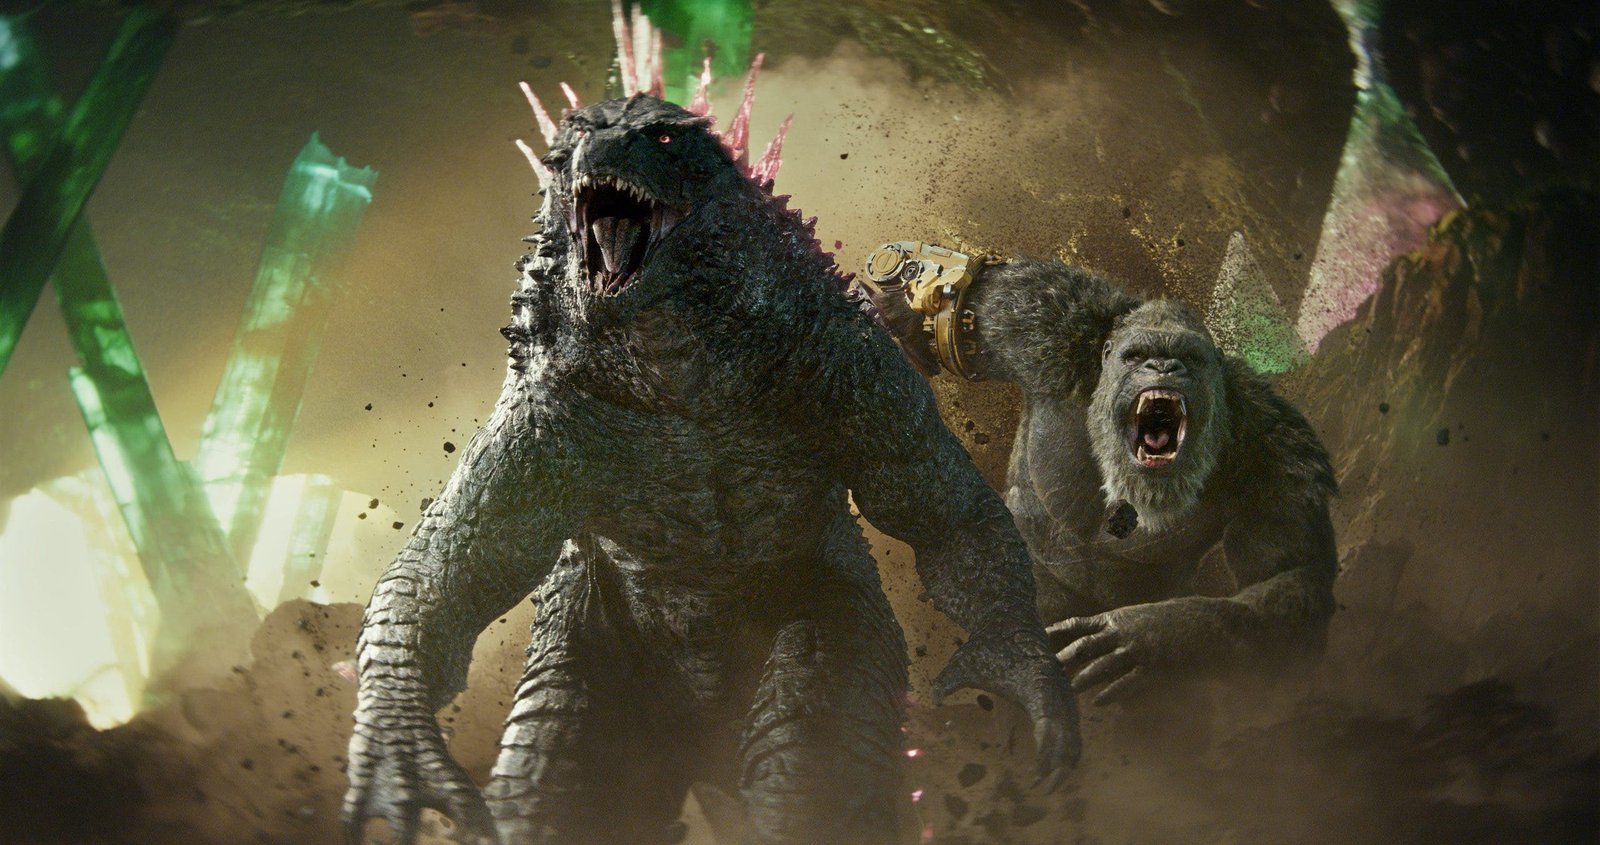 Titans are emerging from Hollow Earth as Godzilla x Kong The New Empire exhibit at the SM Mall of Asia Music Hall open to the public from March 25 to April 6